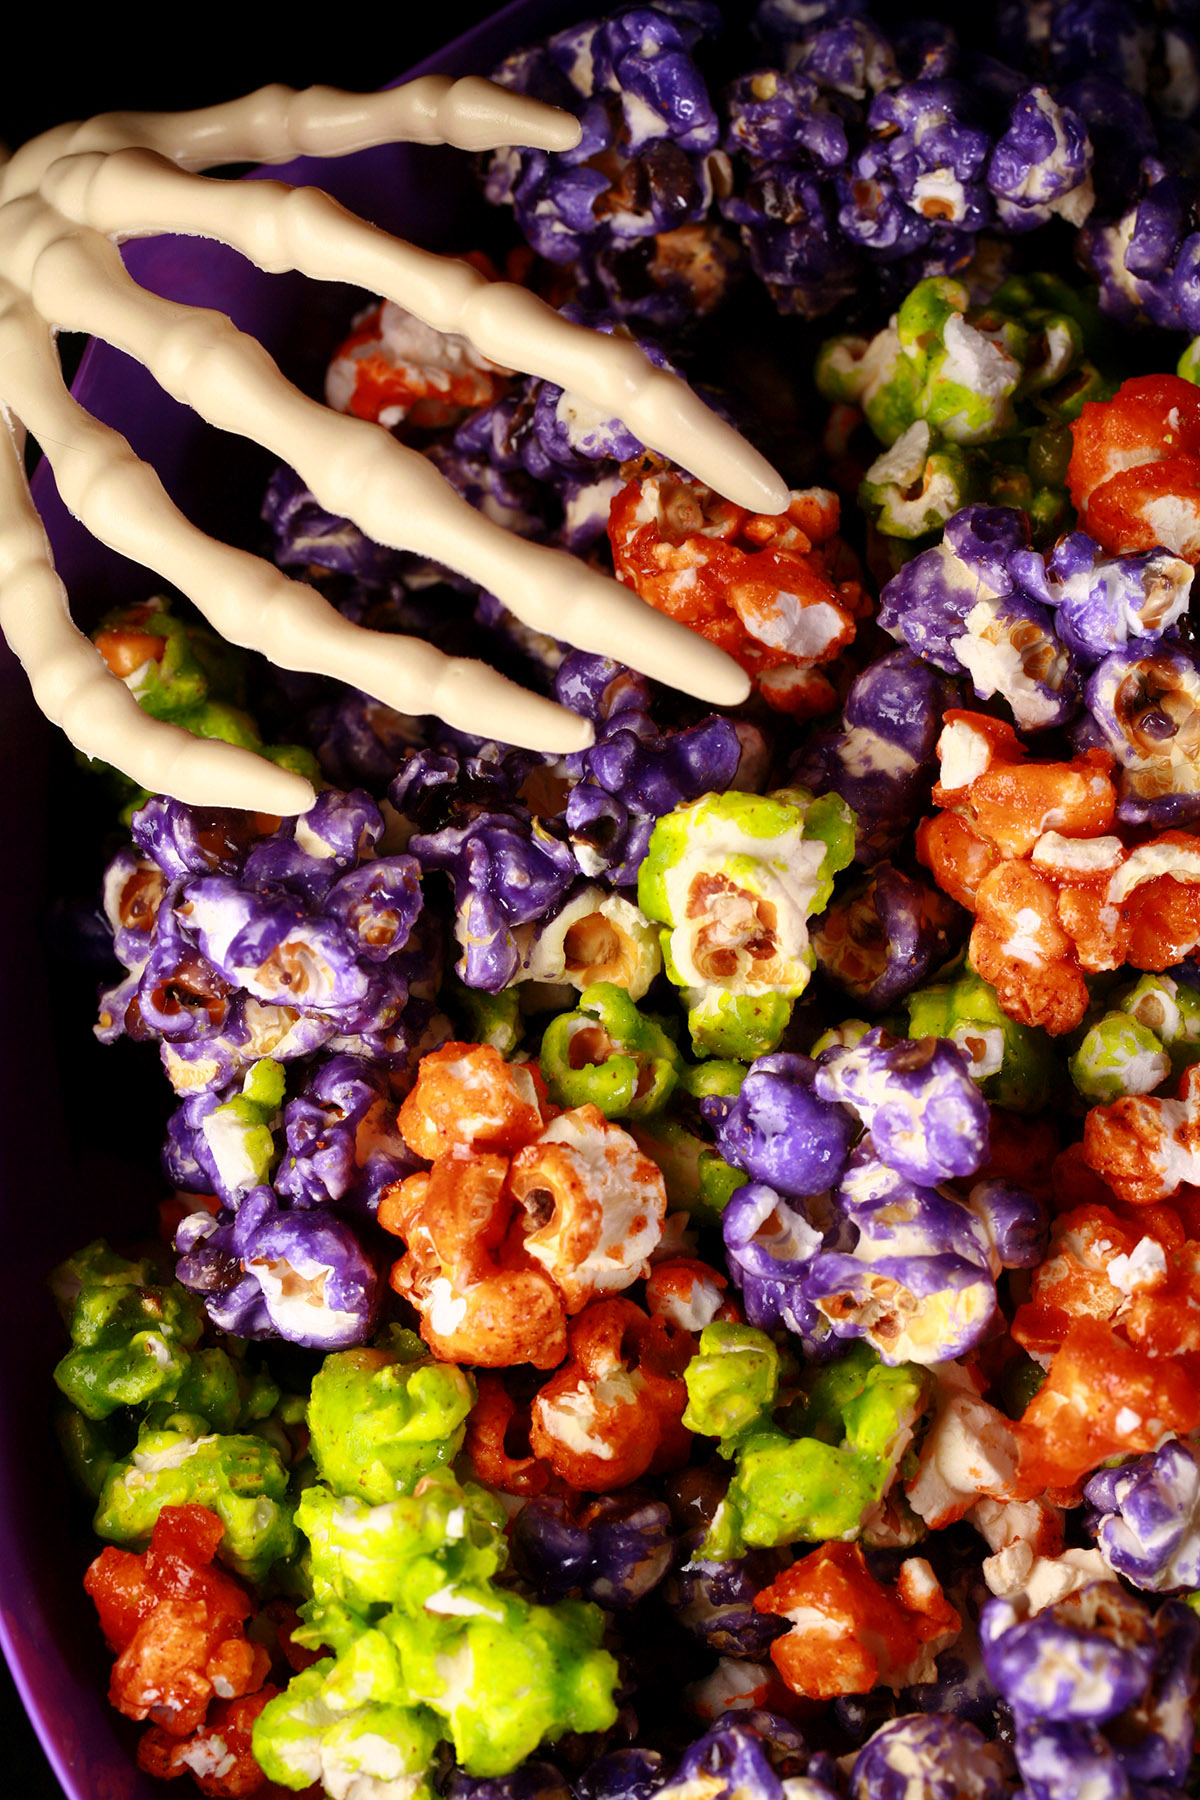 A bowl of Halloween popcorn - orange, purple, and lime green glazed popcorn, mixed together. A pair of skeleton hand serving spoons are visible.